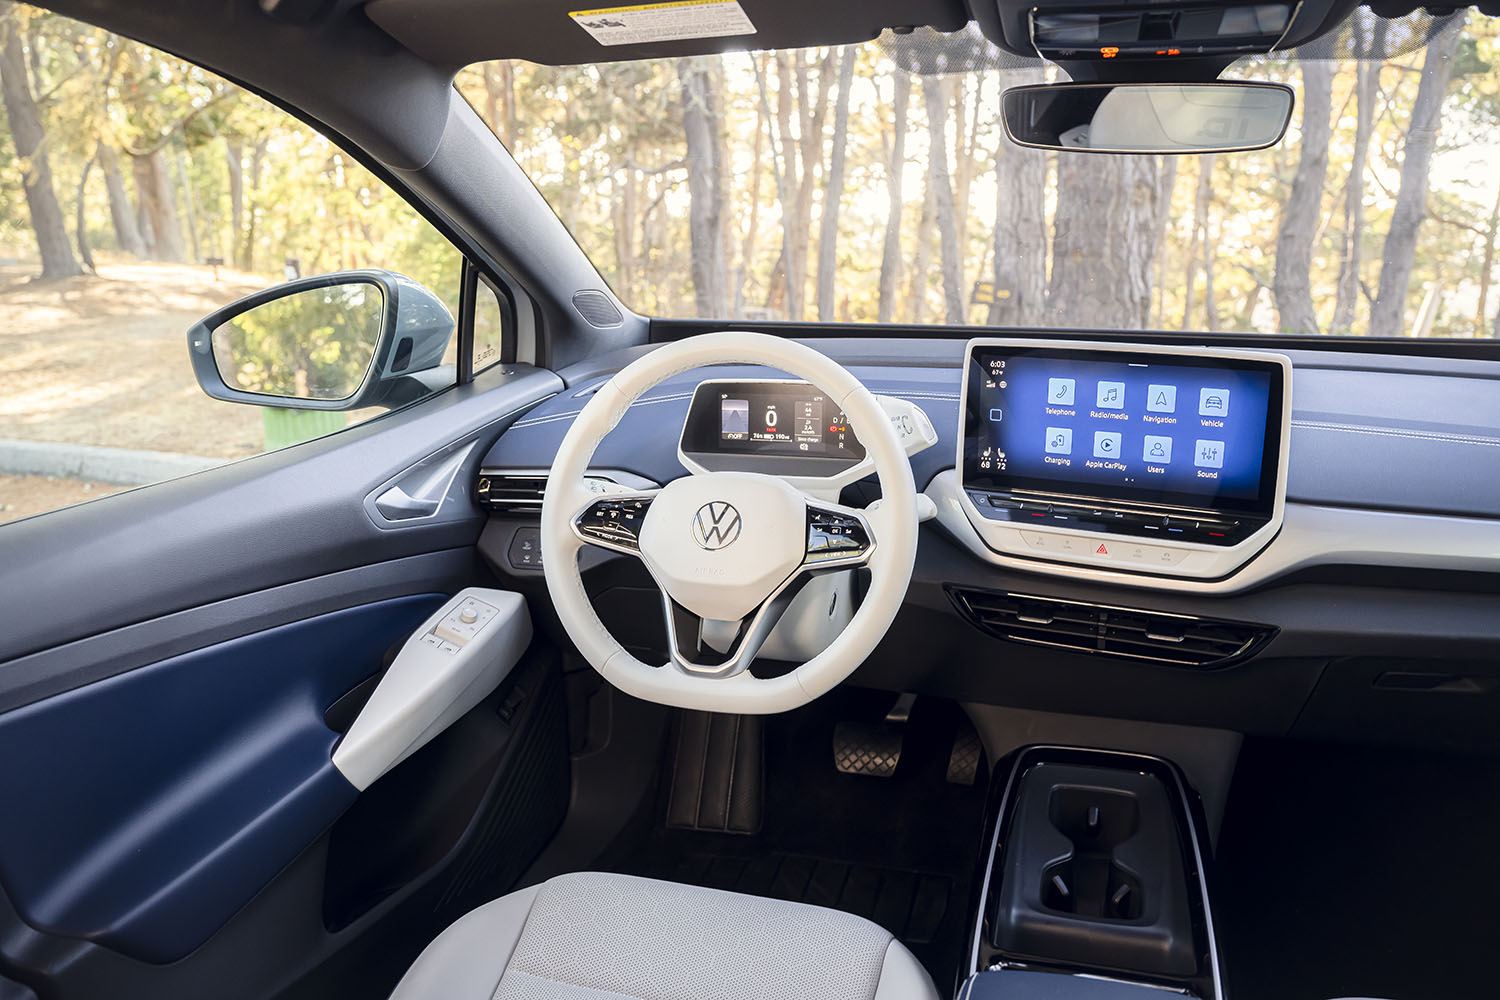 The infotainment screen and driver's seat of a 2023 Volkswagen ID.4 EV